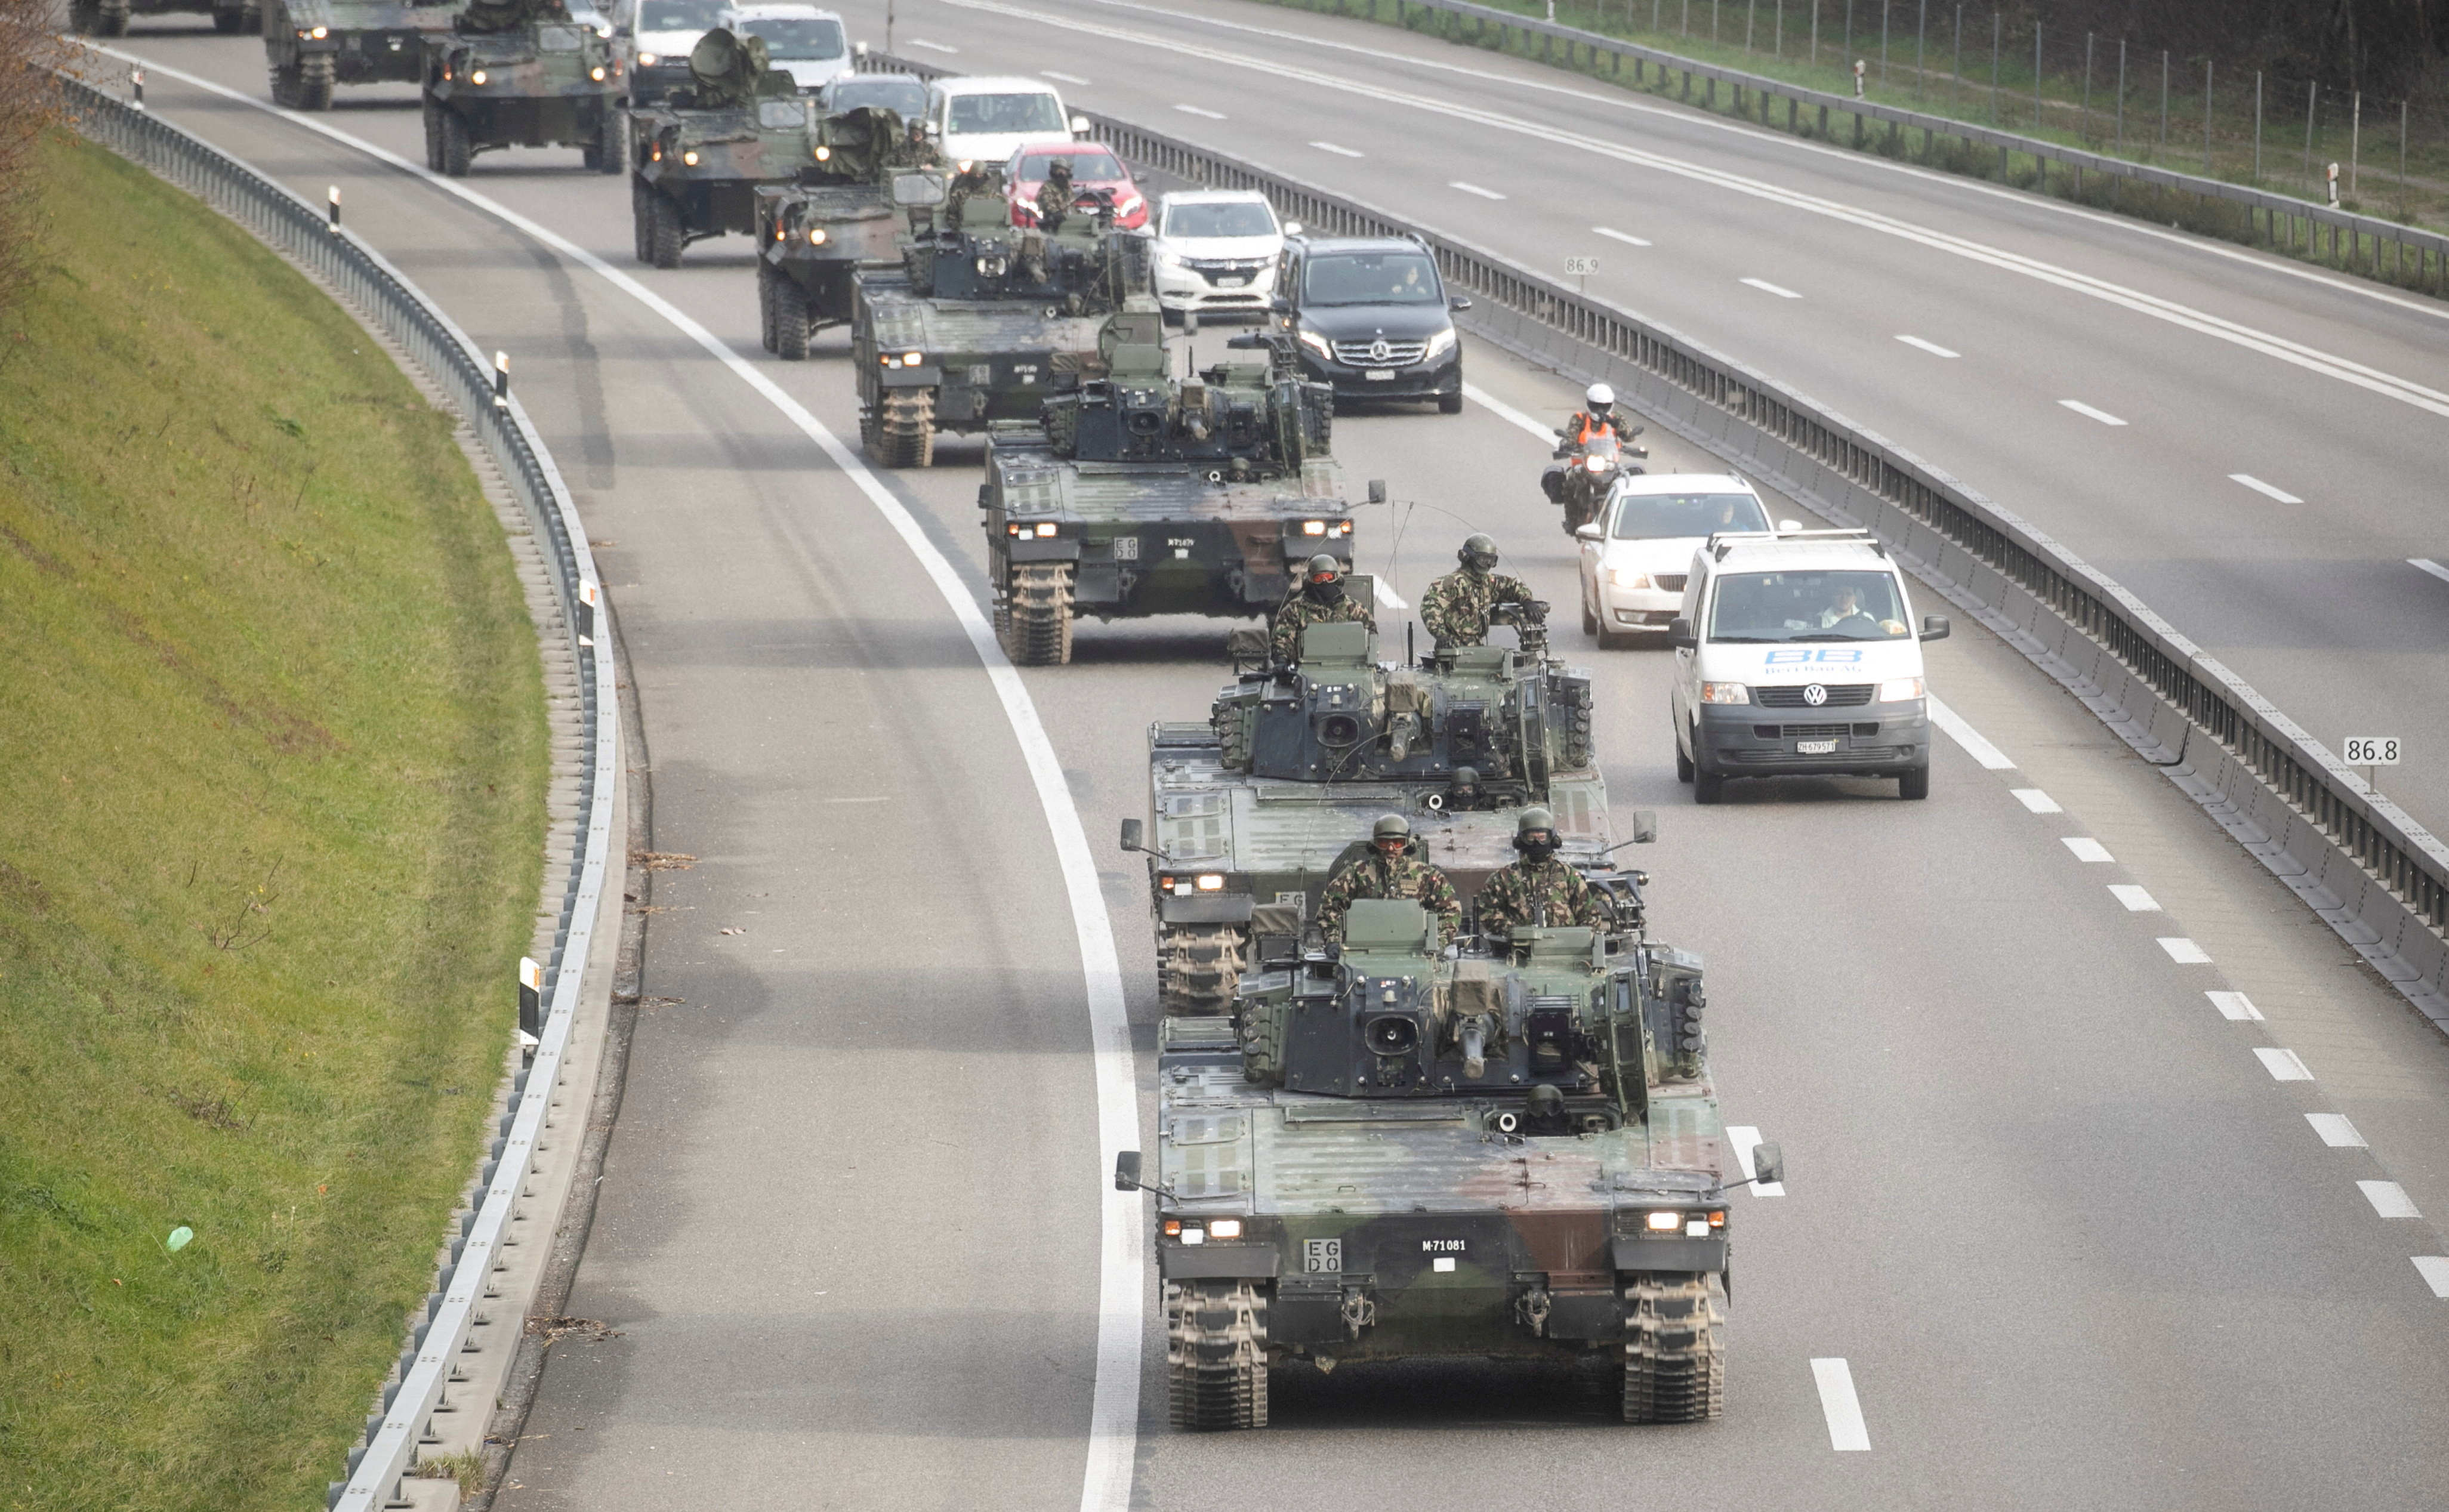 Vehicles of the Swiss Army take part in the military exercise 